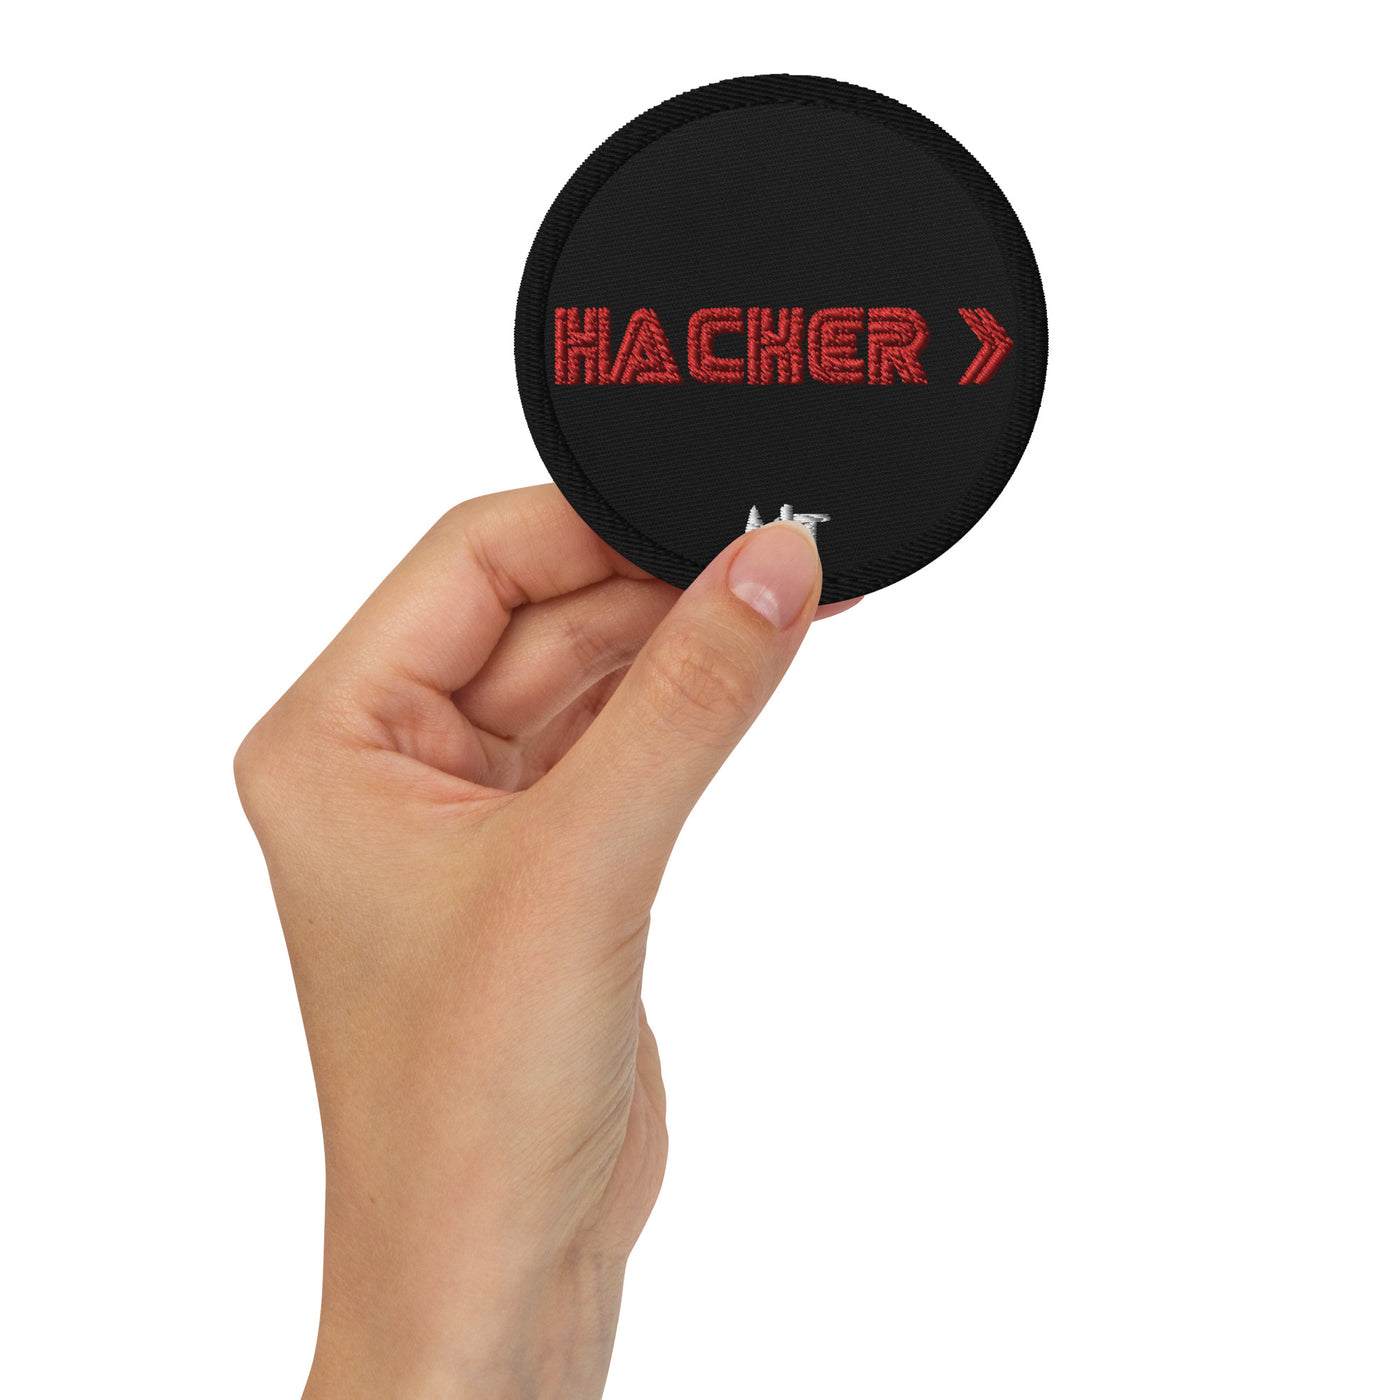 Hacker v3 - Embroidered patches